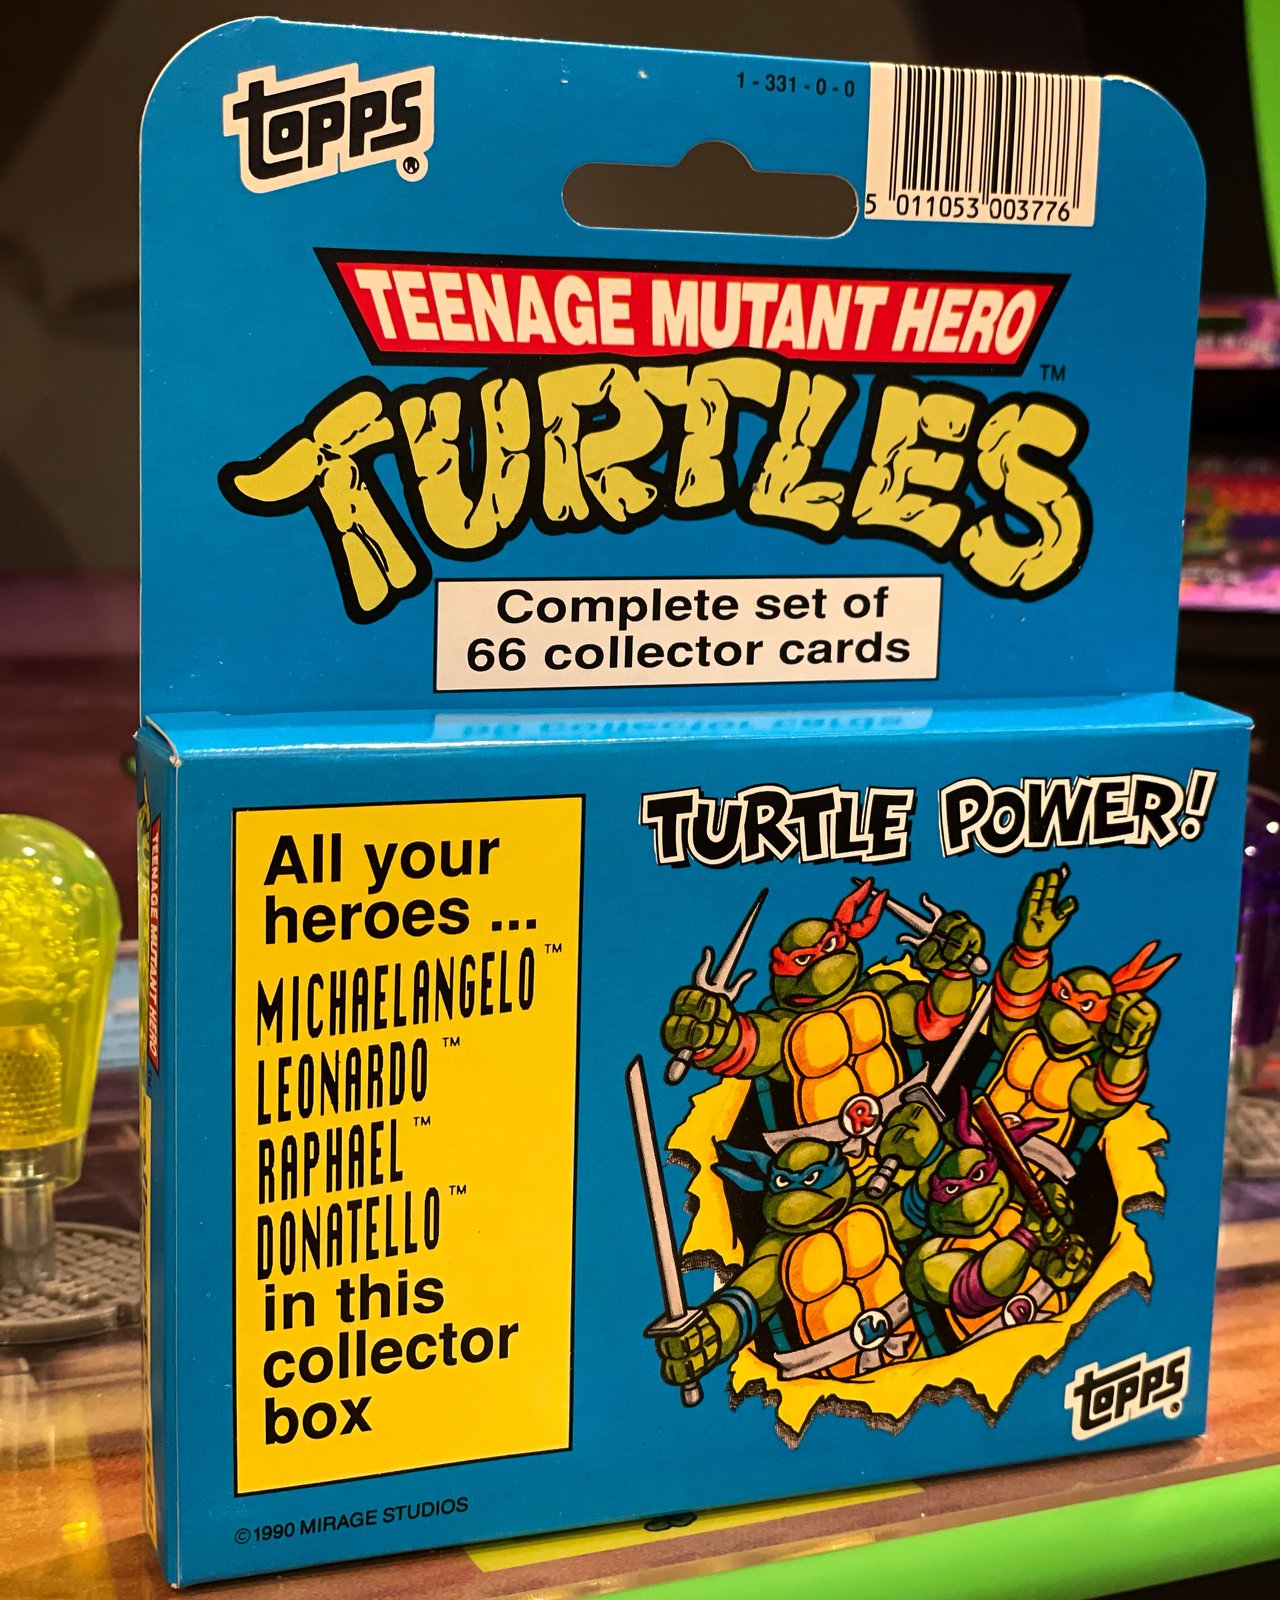 Topps Teenage Mutant Ninja Turtles Trading cards all 66 cards 11 stickers 1990 